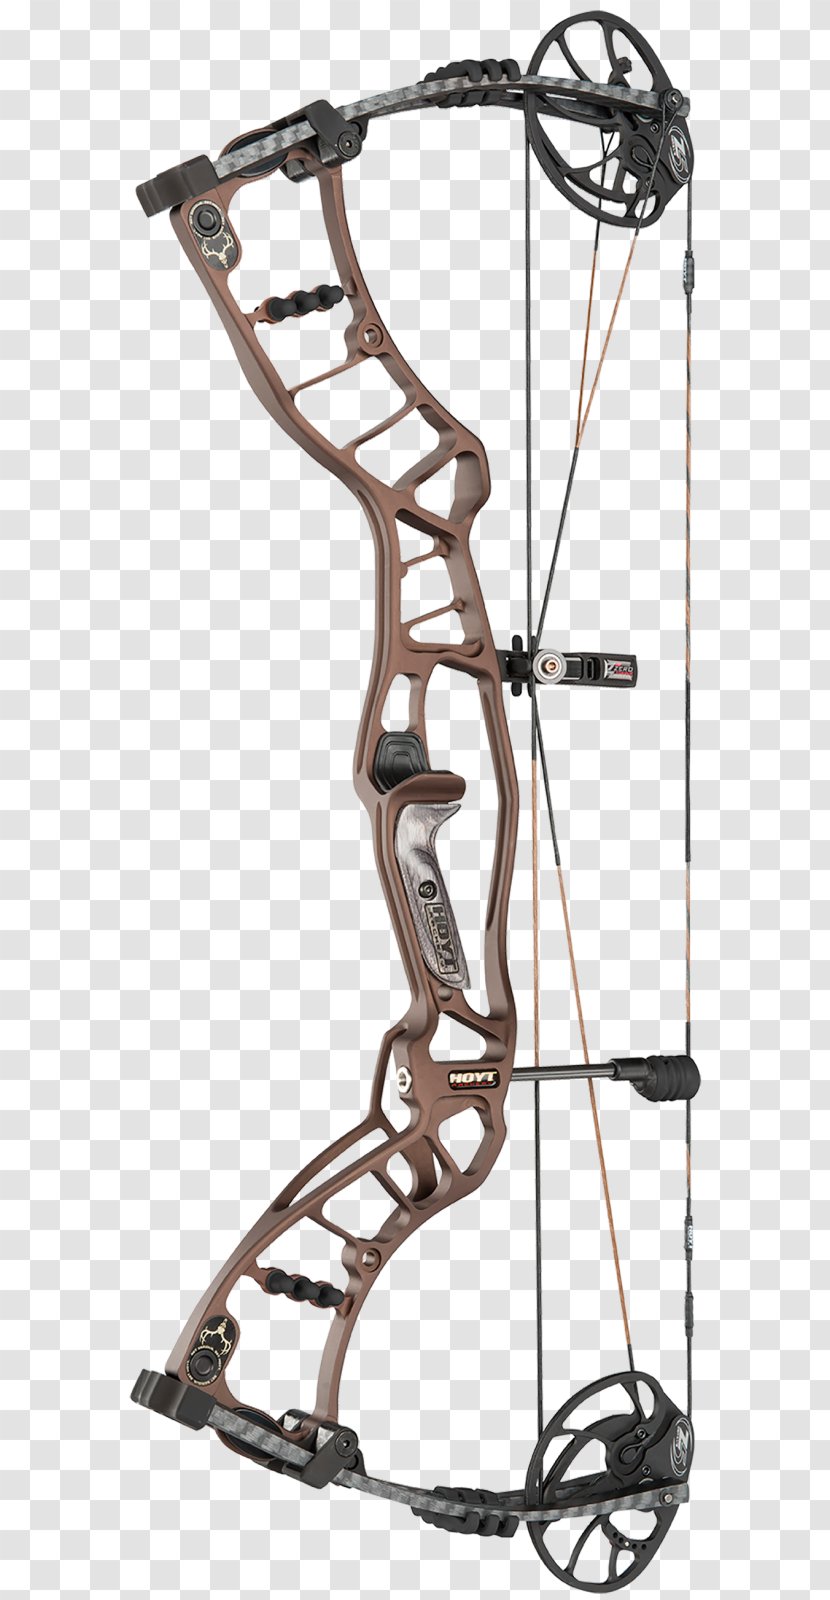 Cam Bow And Arrow Compound Bows Turbocharger Cadillac XTS - Hunting - Harvesting Transparent PNG